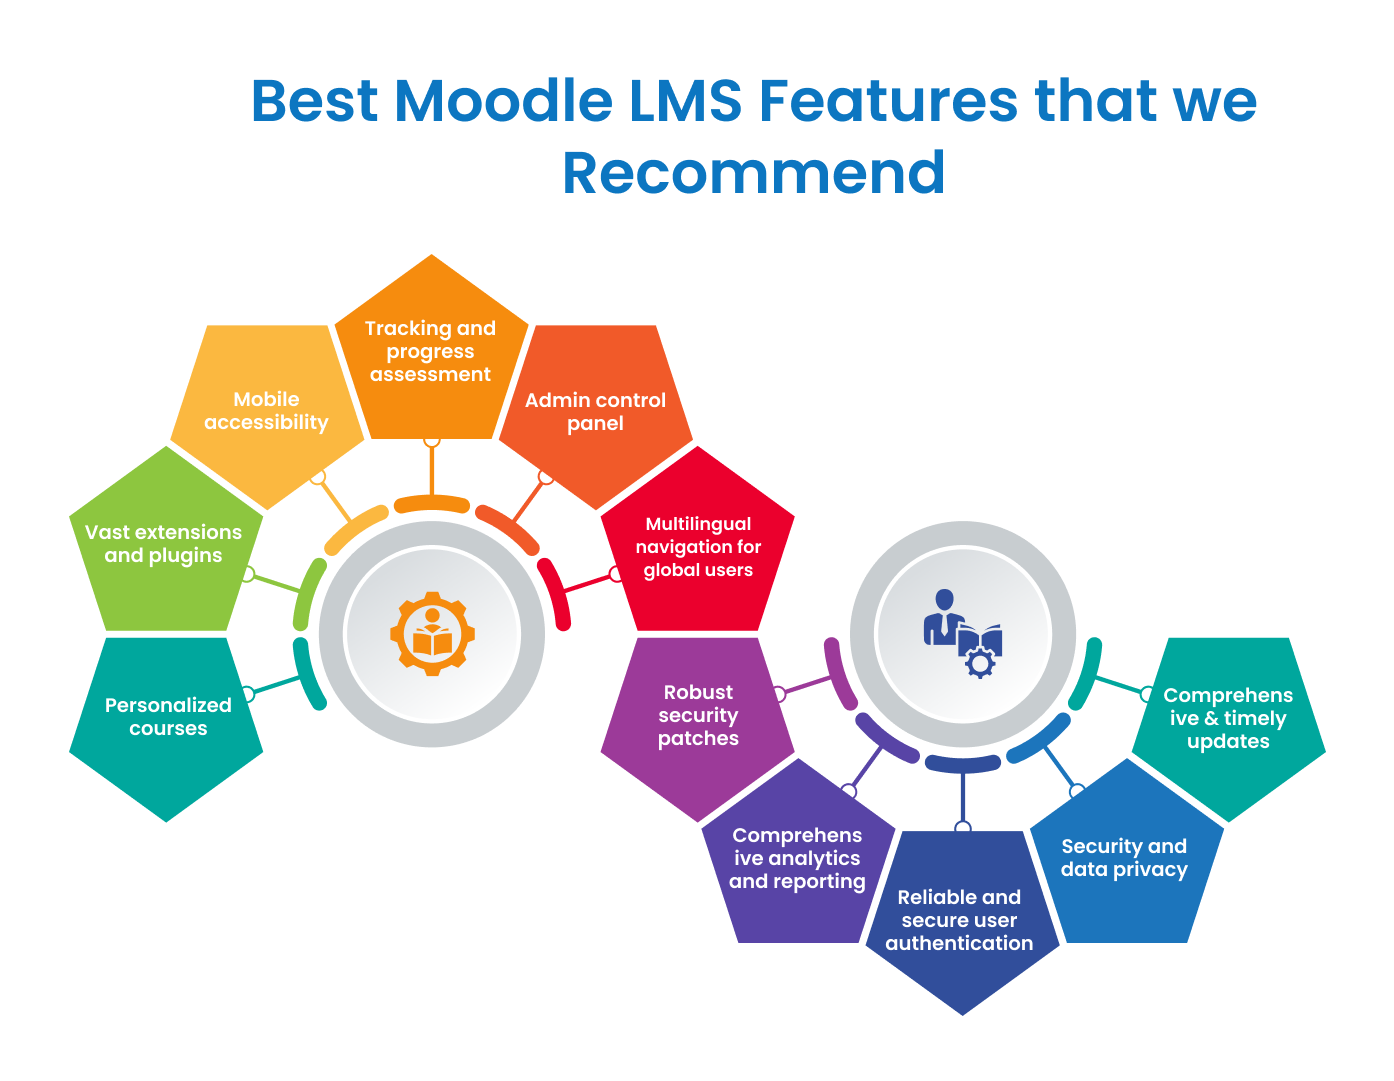 Best Moodle LMS Features that we recommend